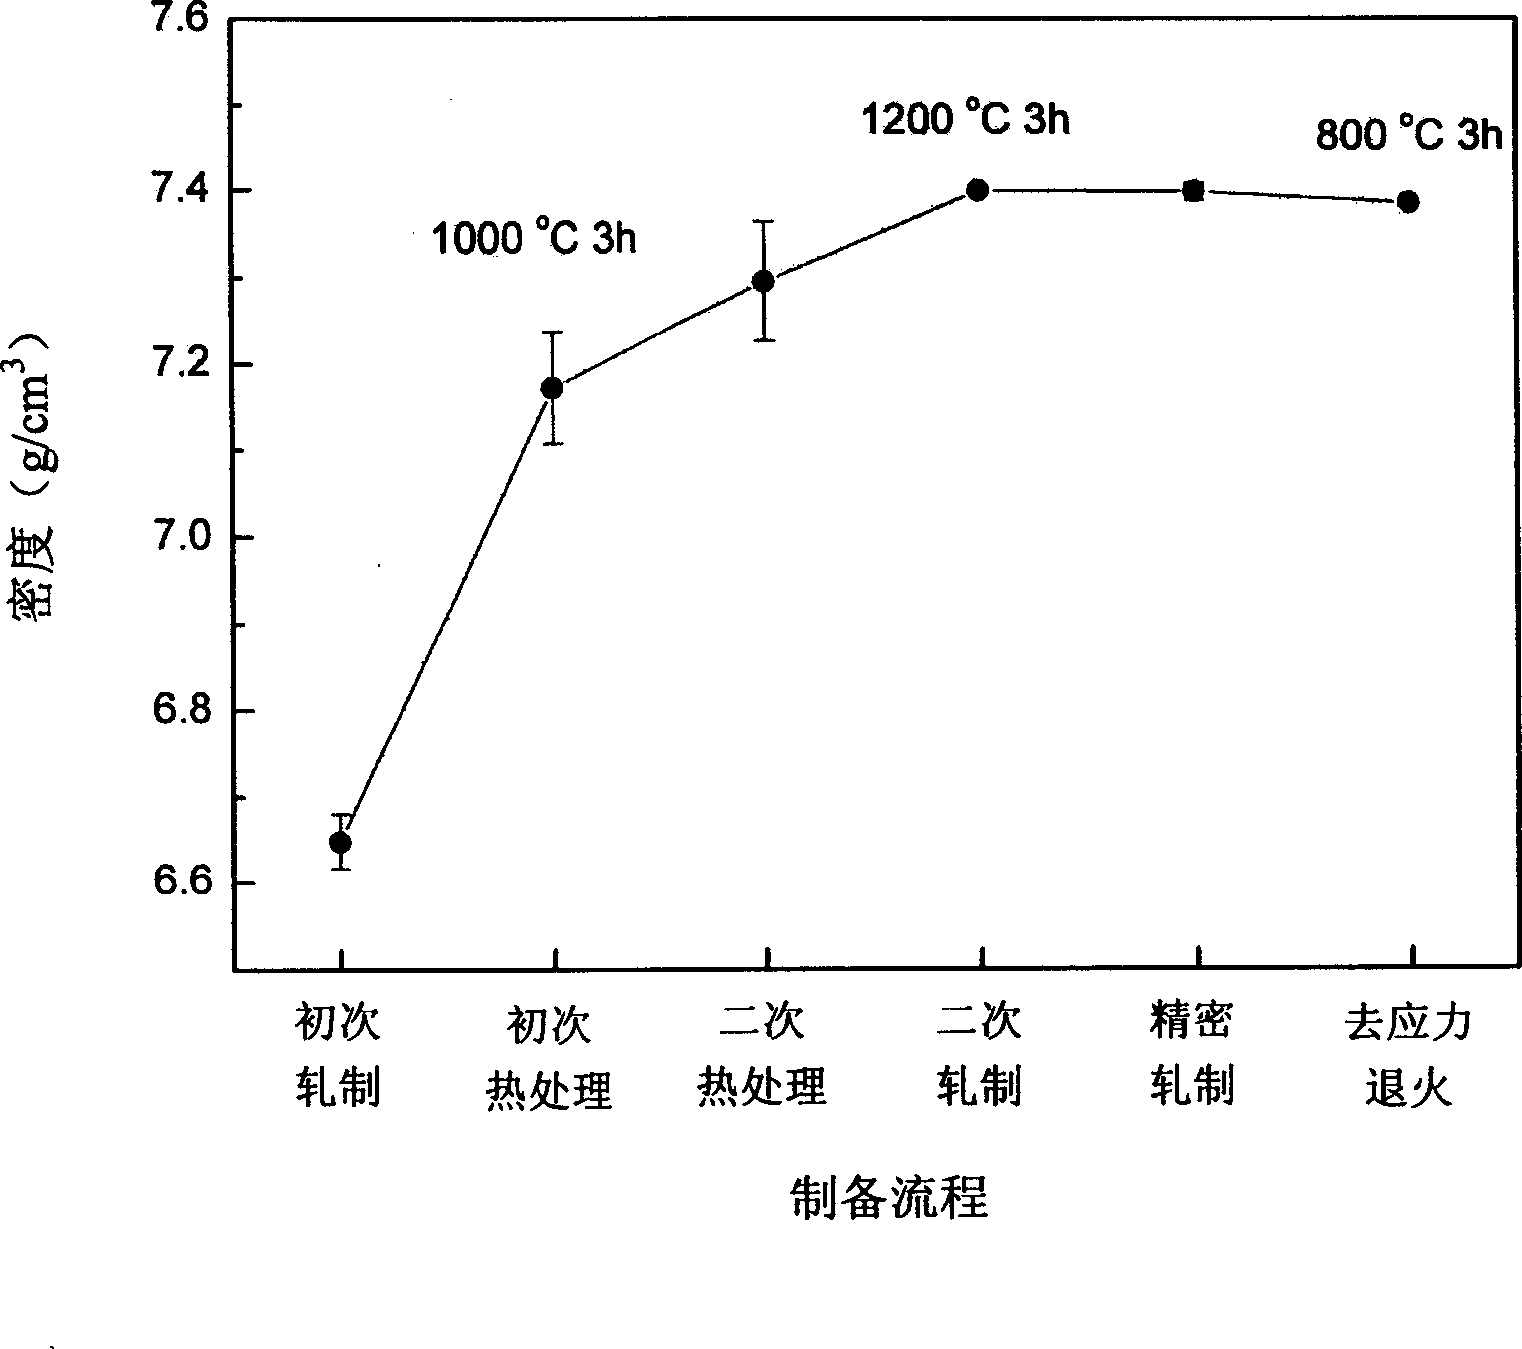 High-silica silicon-steel sheet heat treatment and multiple cold-rolling method